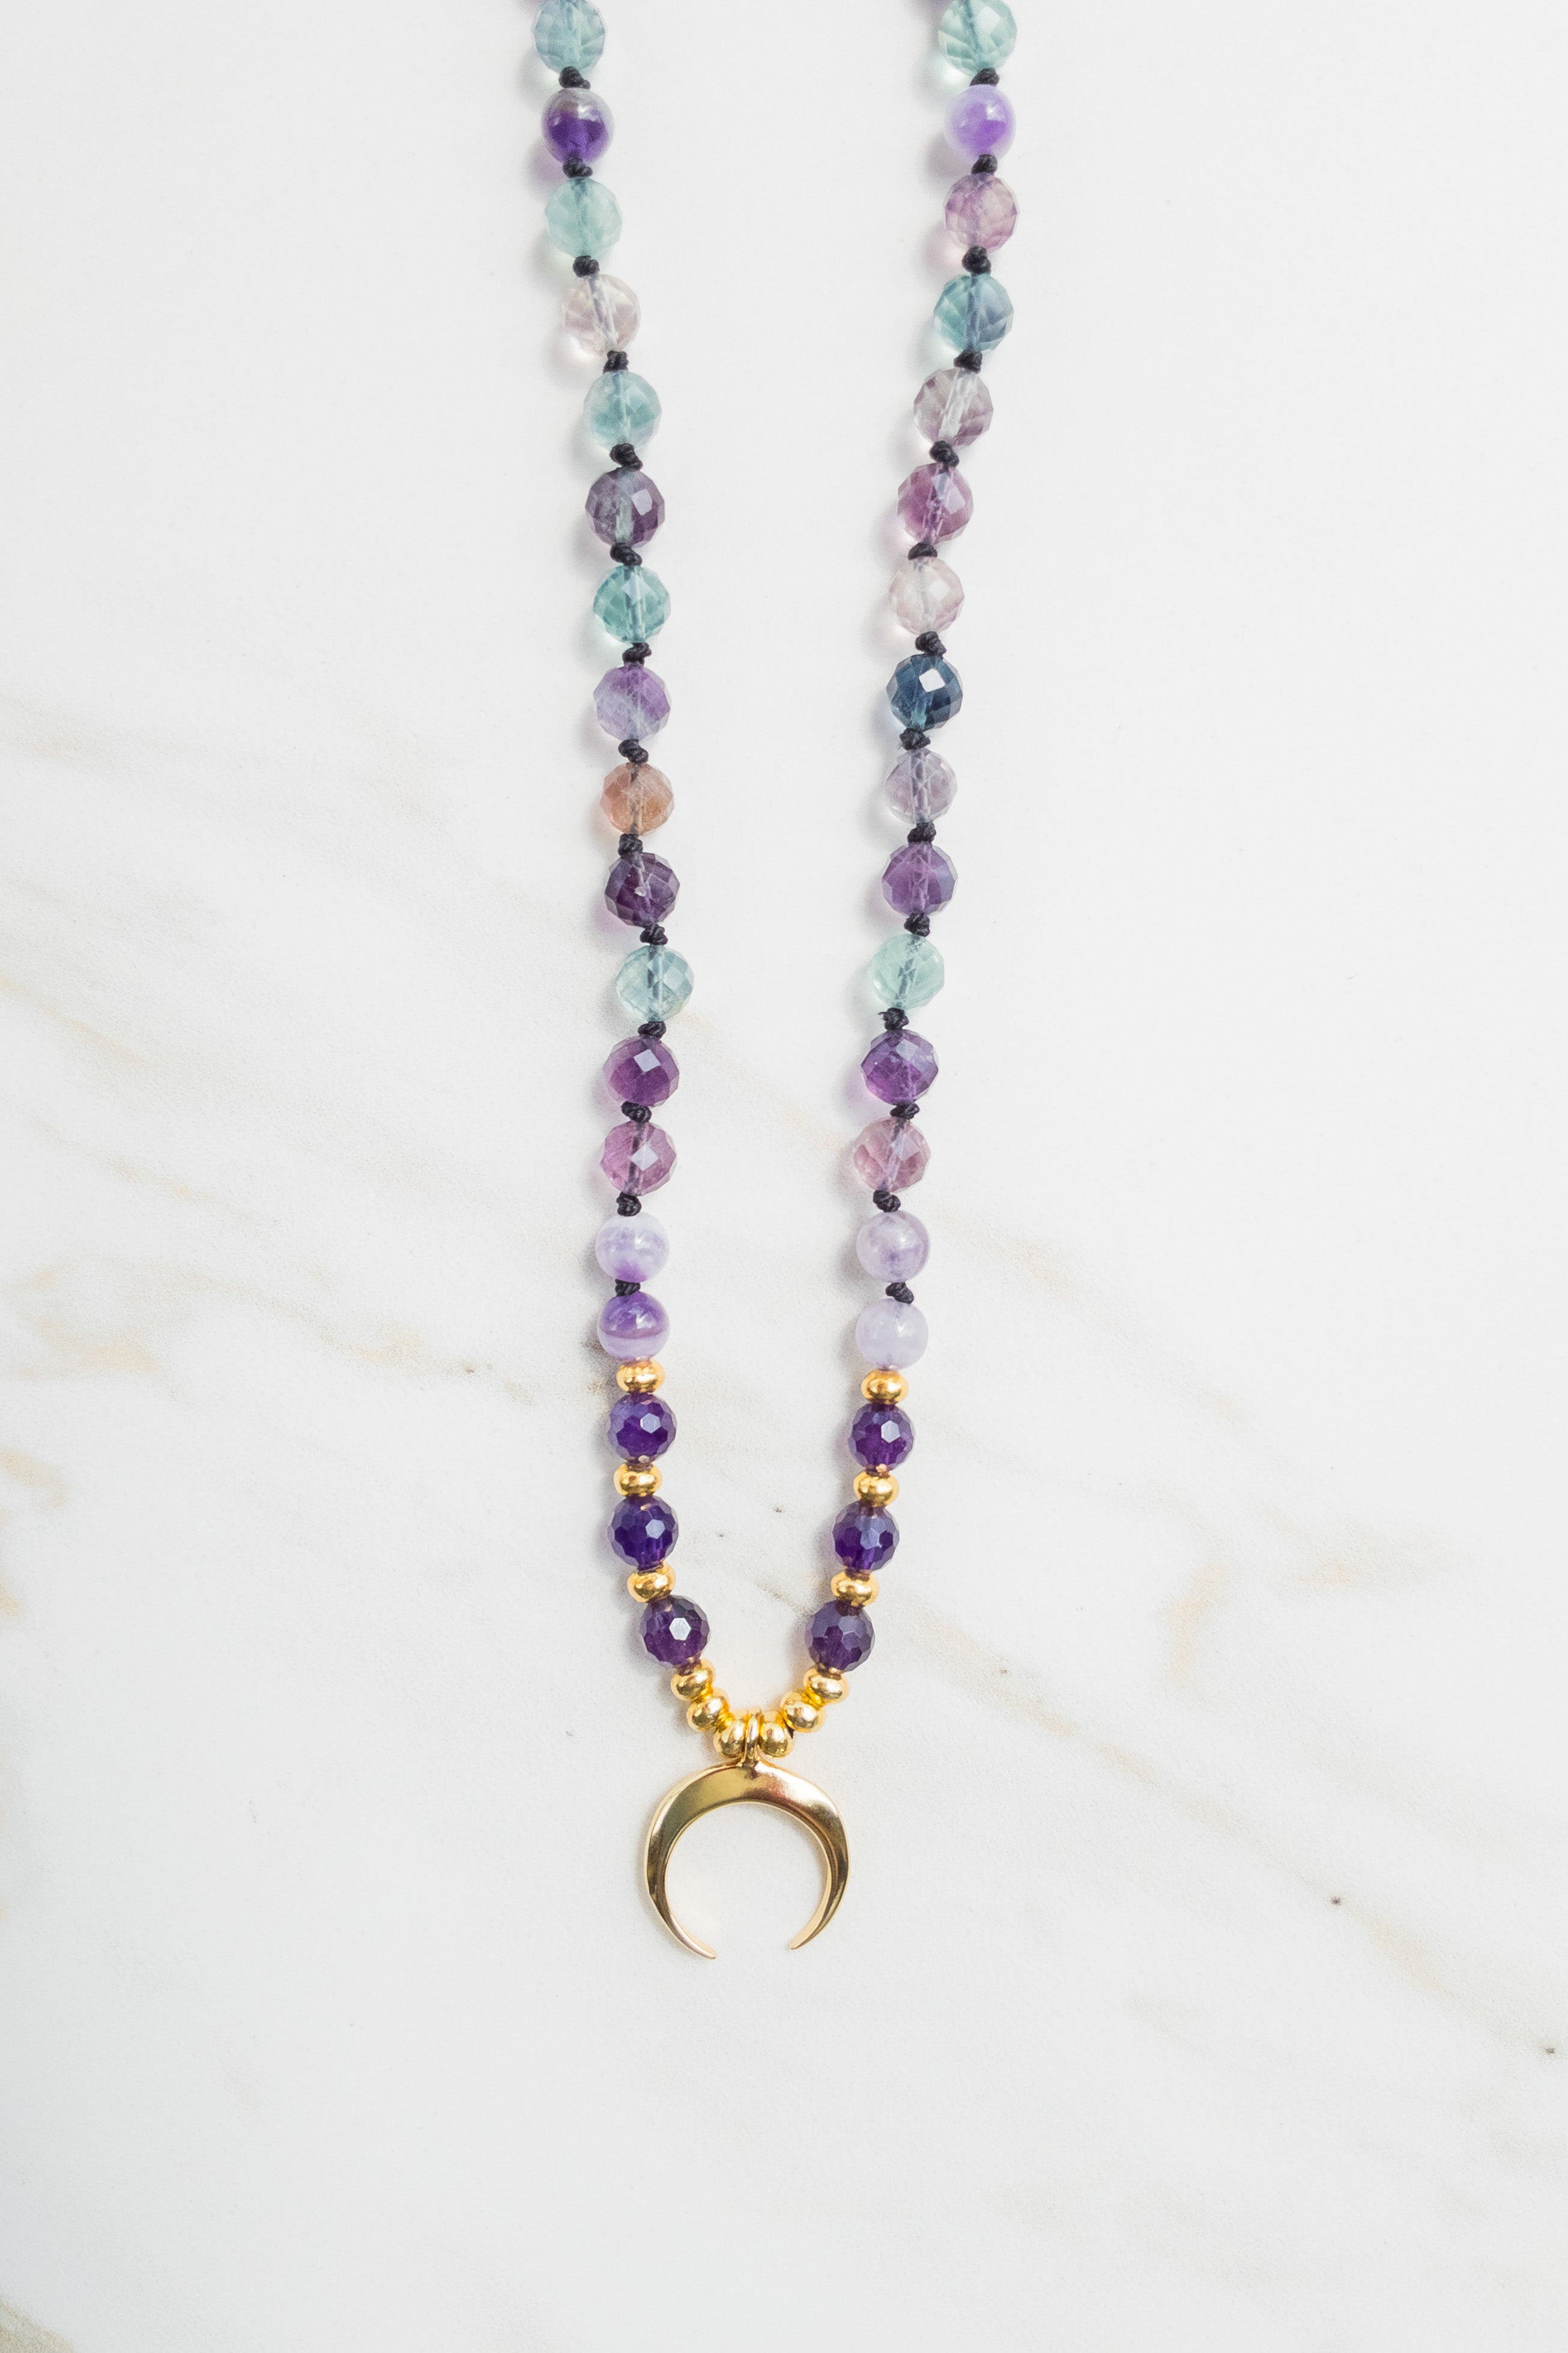 The Starry Serenity Mala Necklace - Fluorite Amethyst - Indradhanush Collection - ShaSha jewellery 